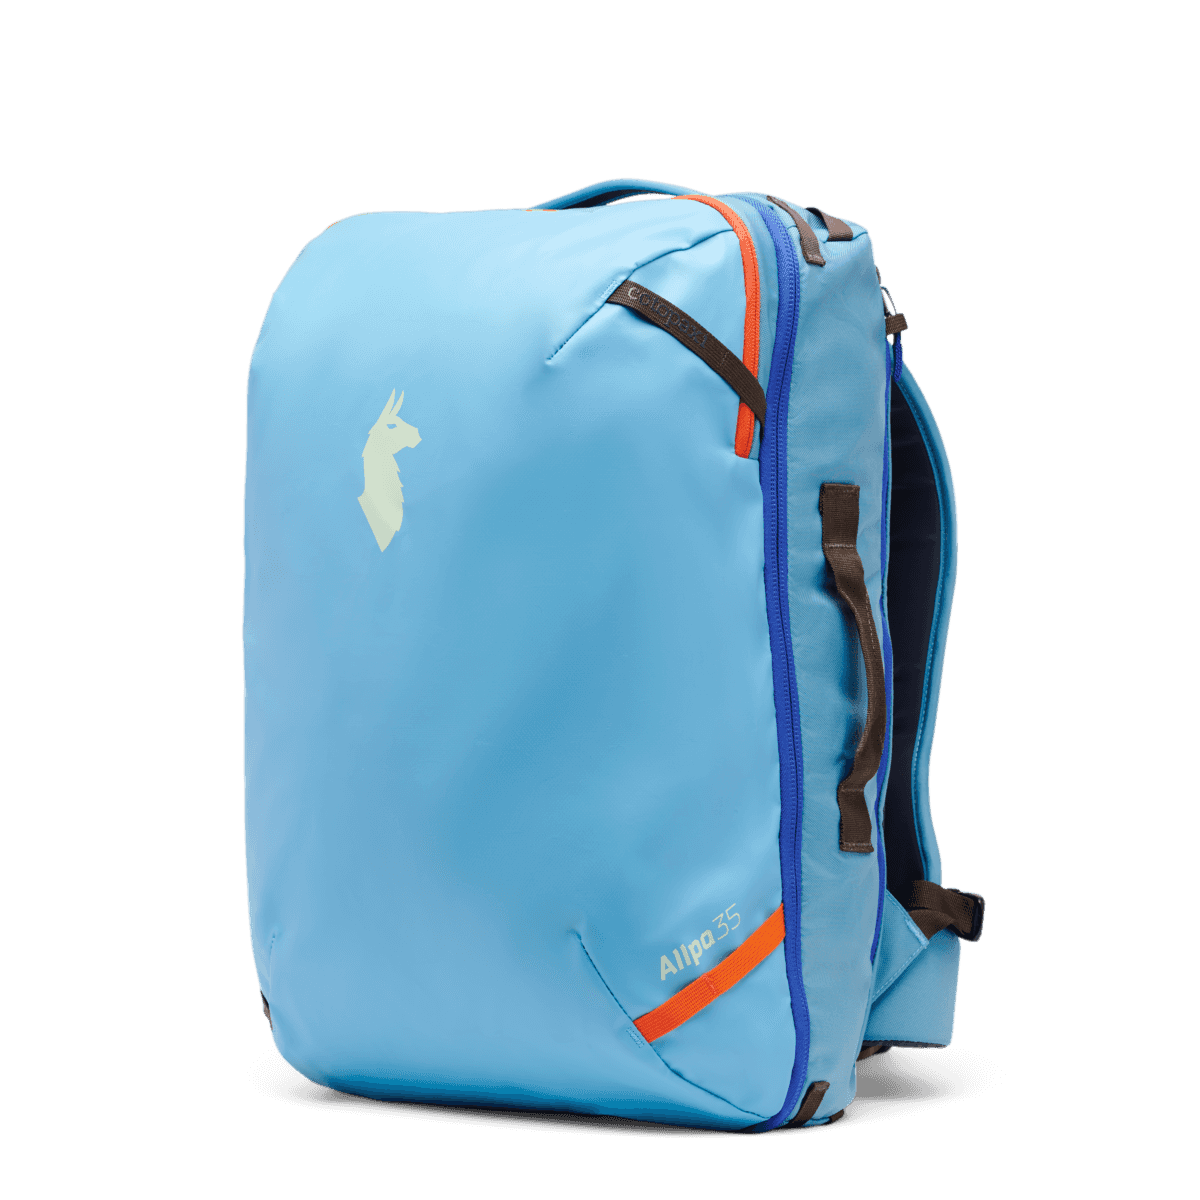 Cotopaxi Allpa 35L Travel Pack in River